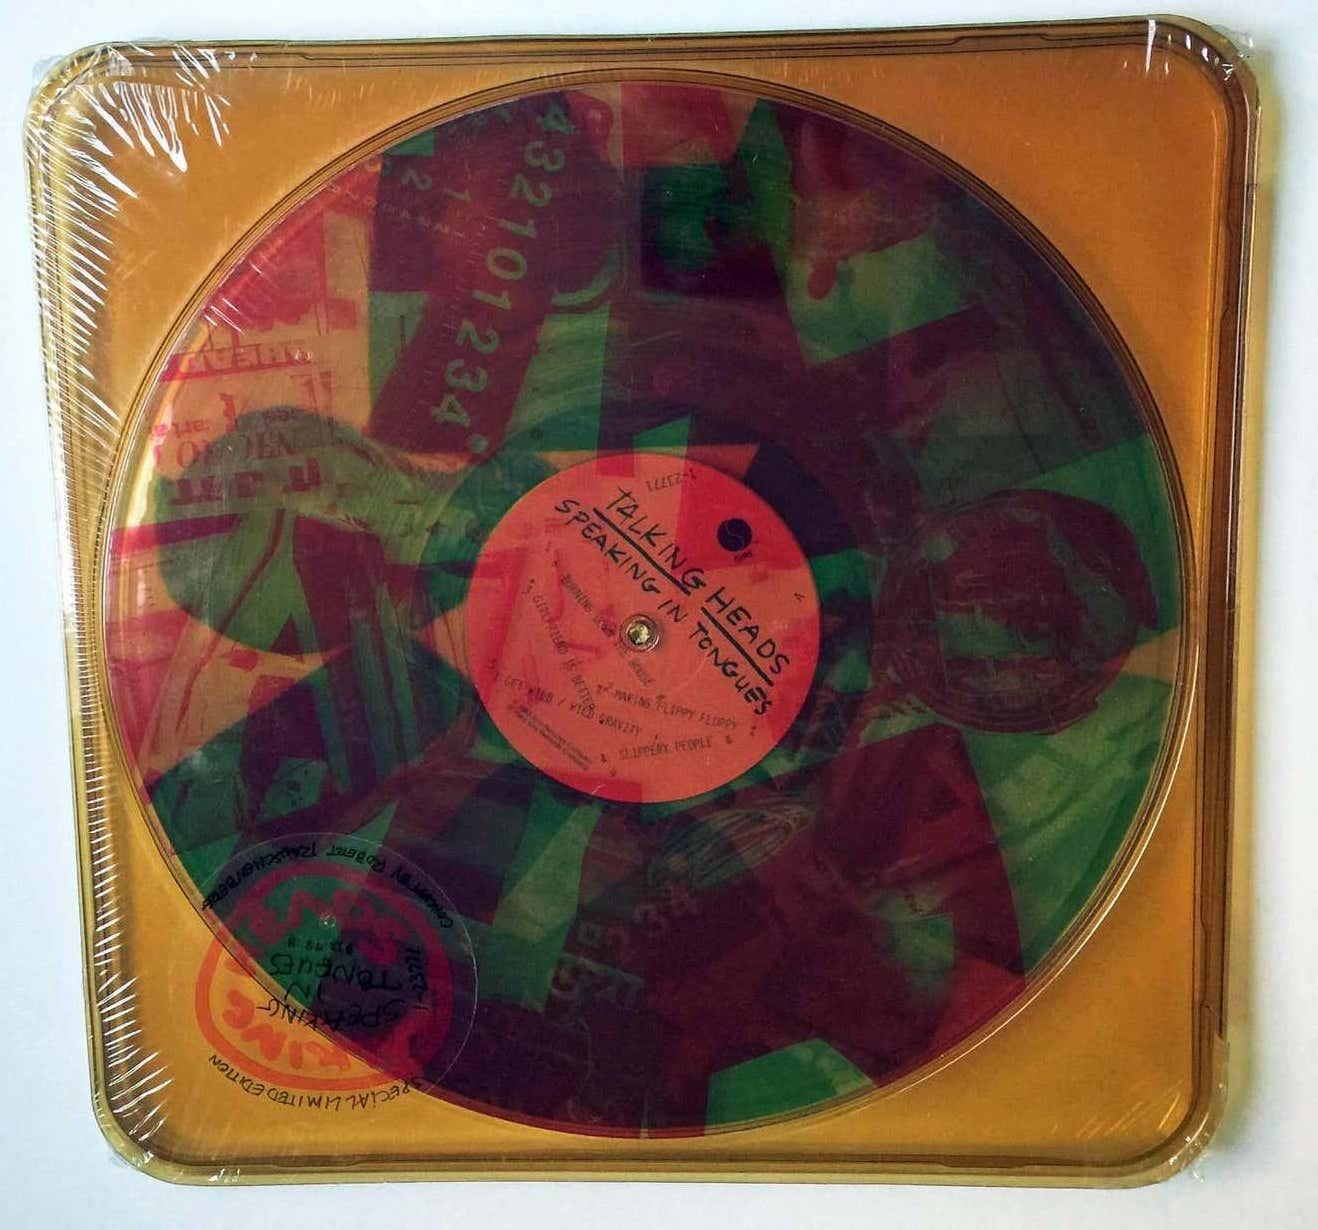 Rare unopened Robert Rauschenberg designed Talking Heads Speaking in Tongues: 
In 1983, legendary pop artist Robert Rauschenberg designed the album cover for Talking Heads’ acclaimed studio album, Speaking in Tongues.  Rauschenberg’s design features